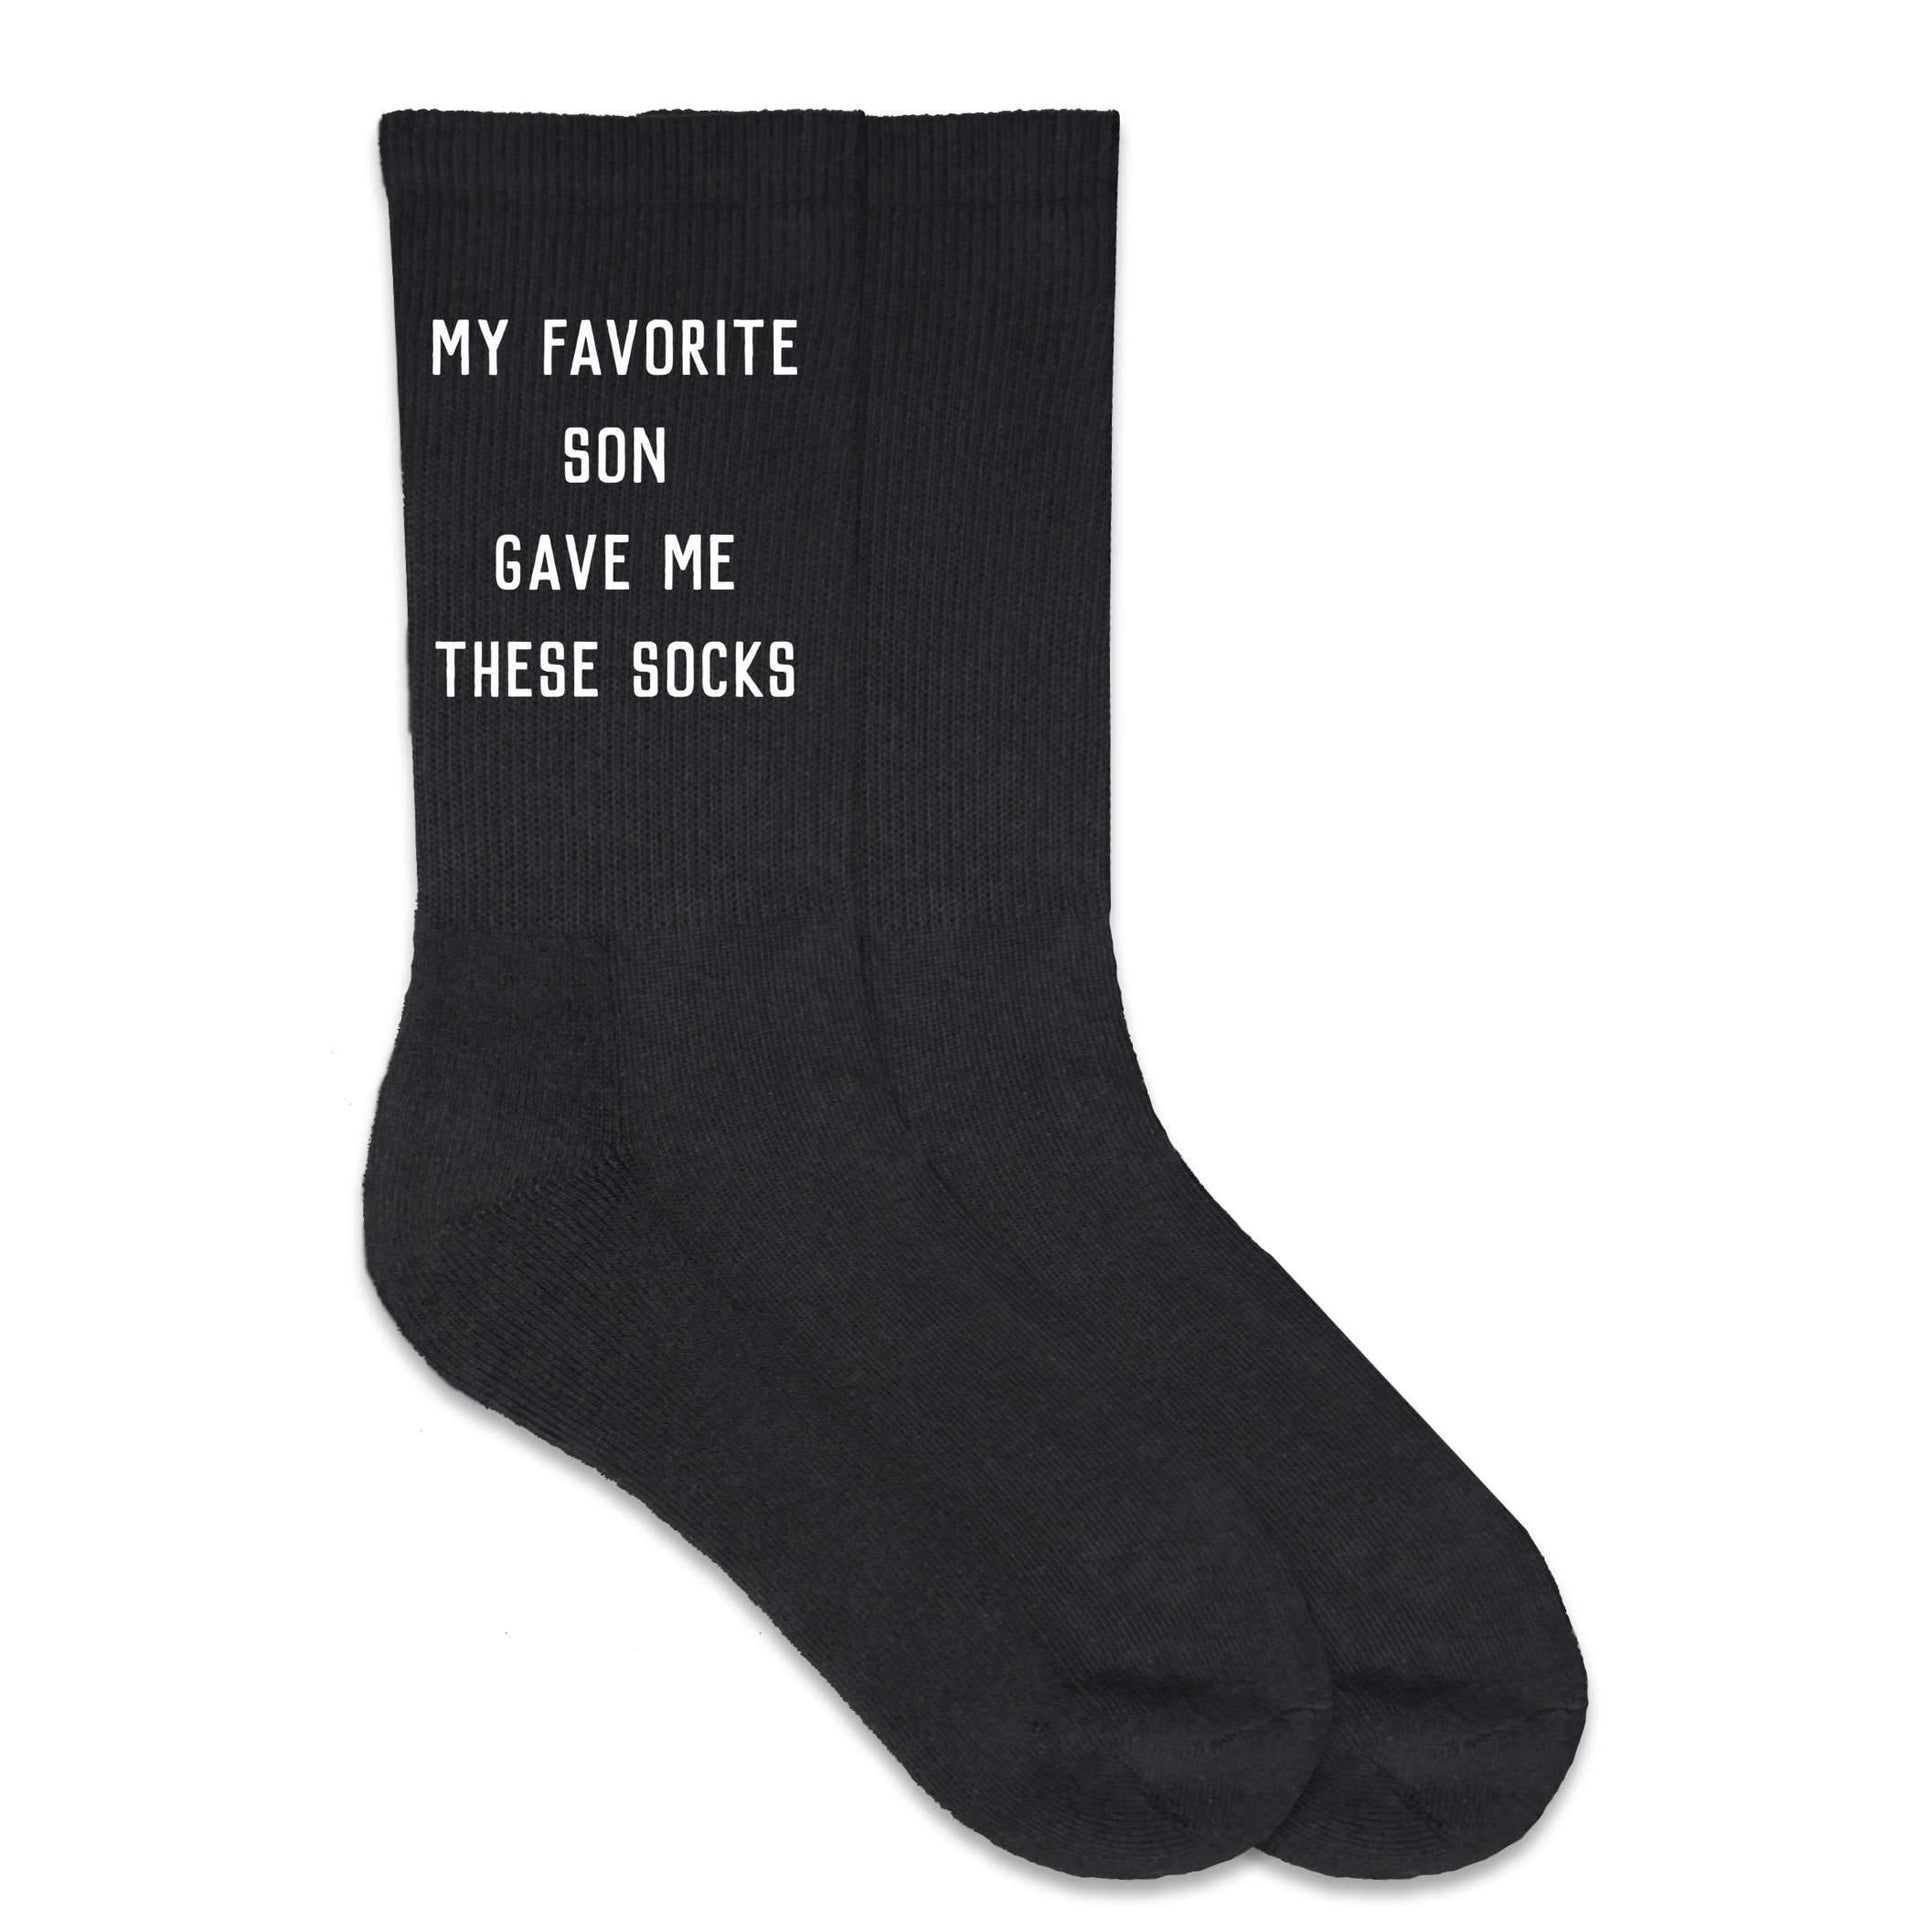 These black crew socks make a fun gift idea from his favorite son